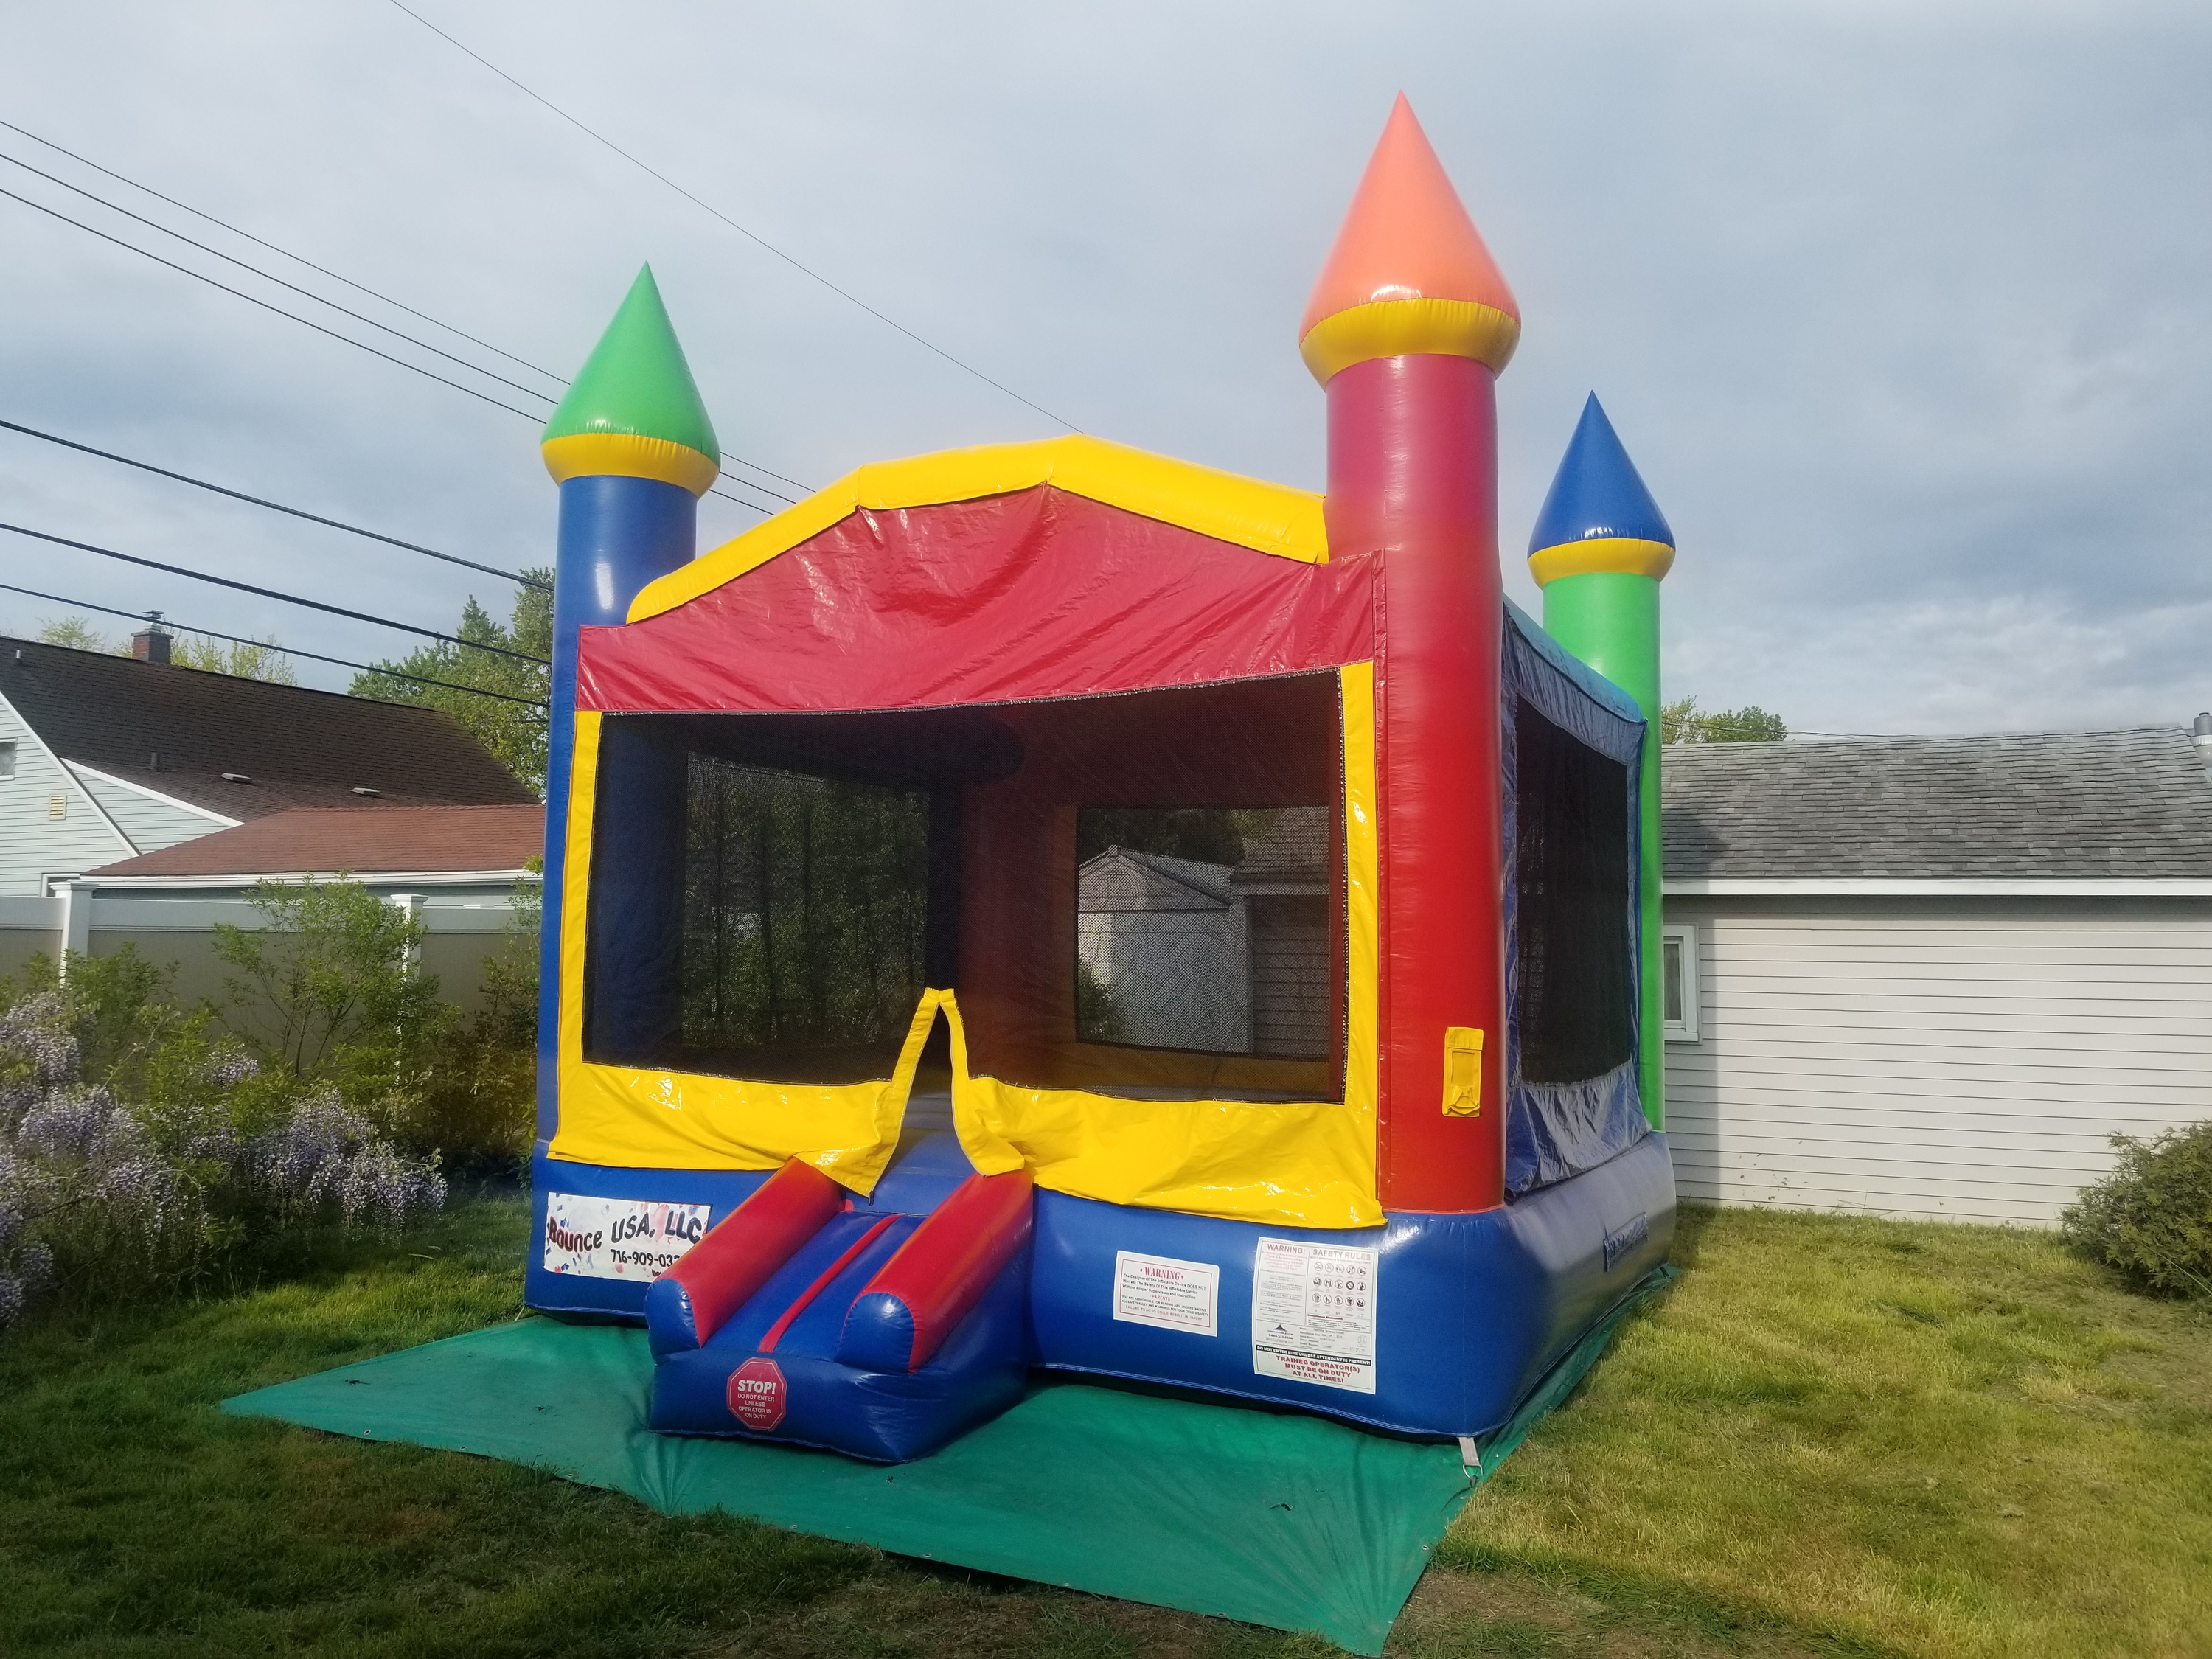 Unisex castle bounce house that was rented for a 6 year old birthday party